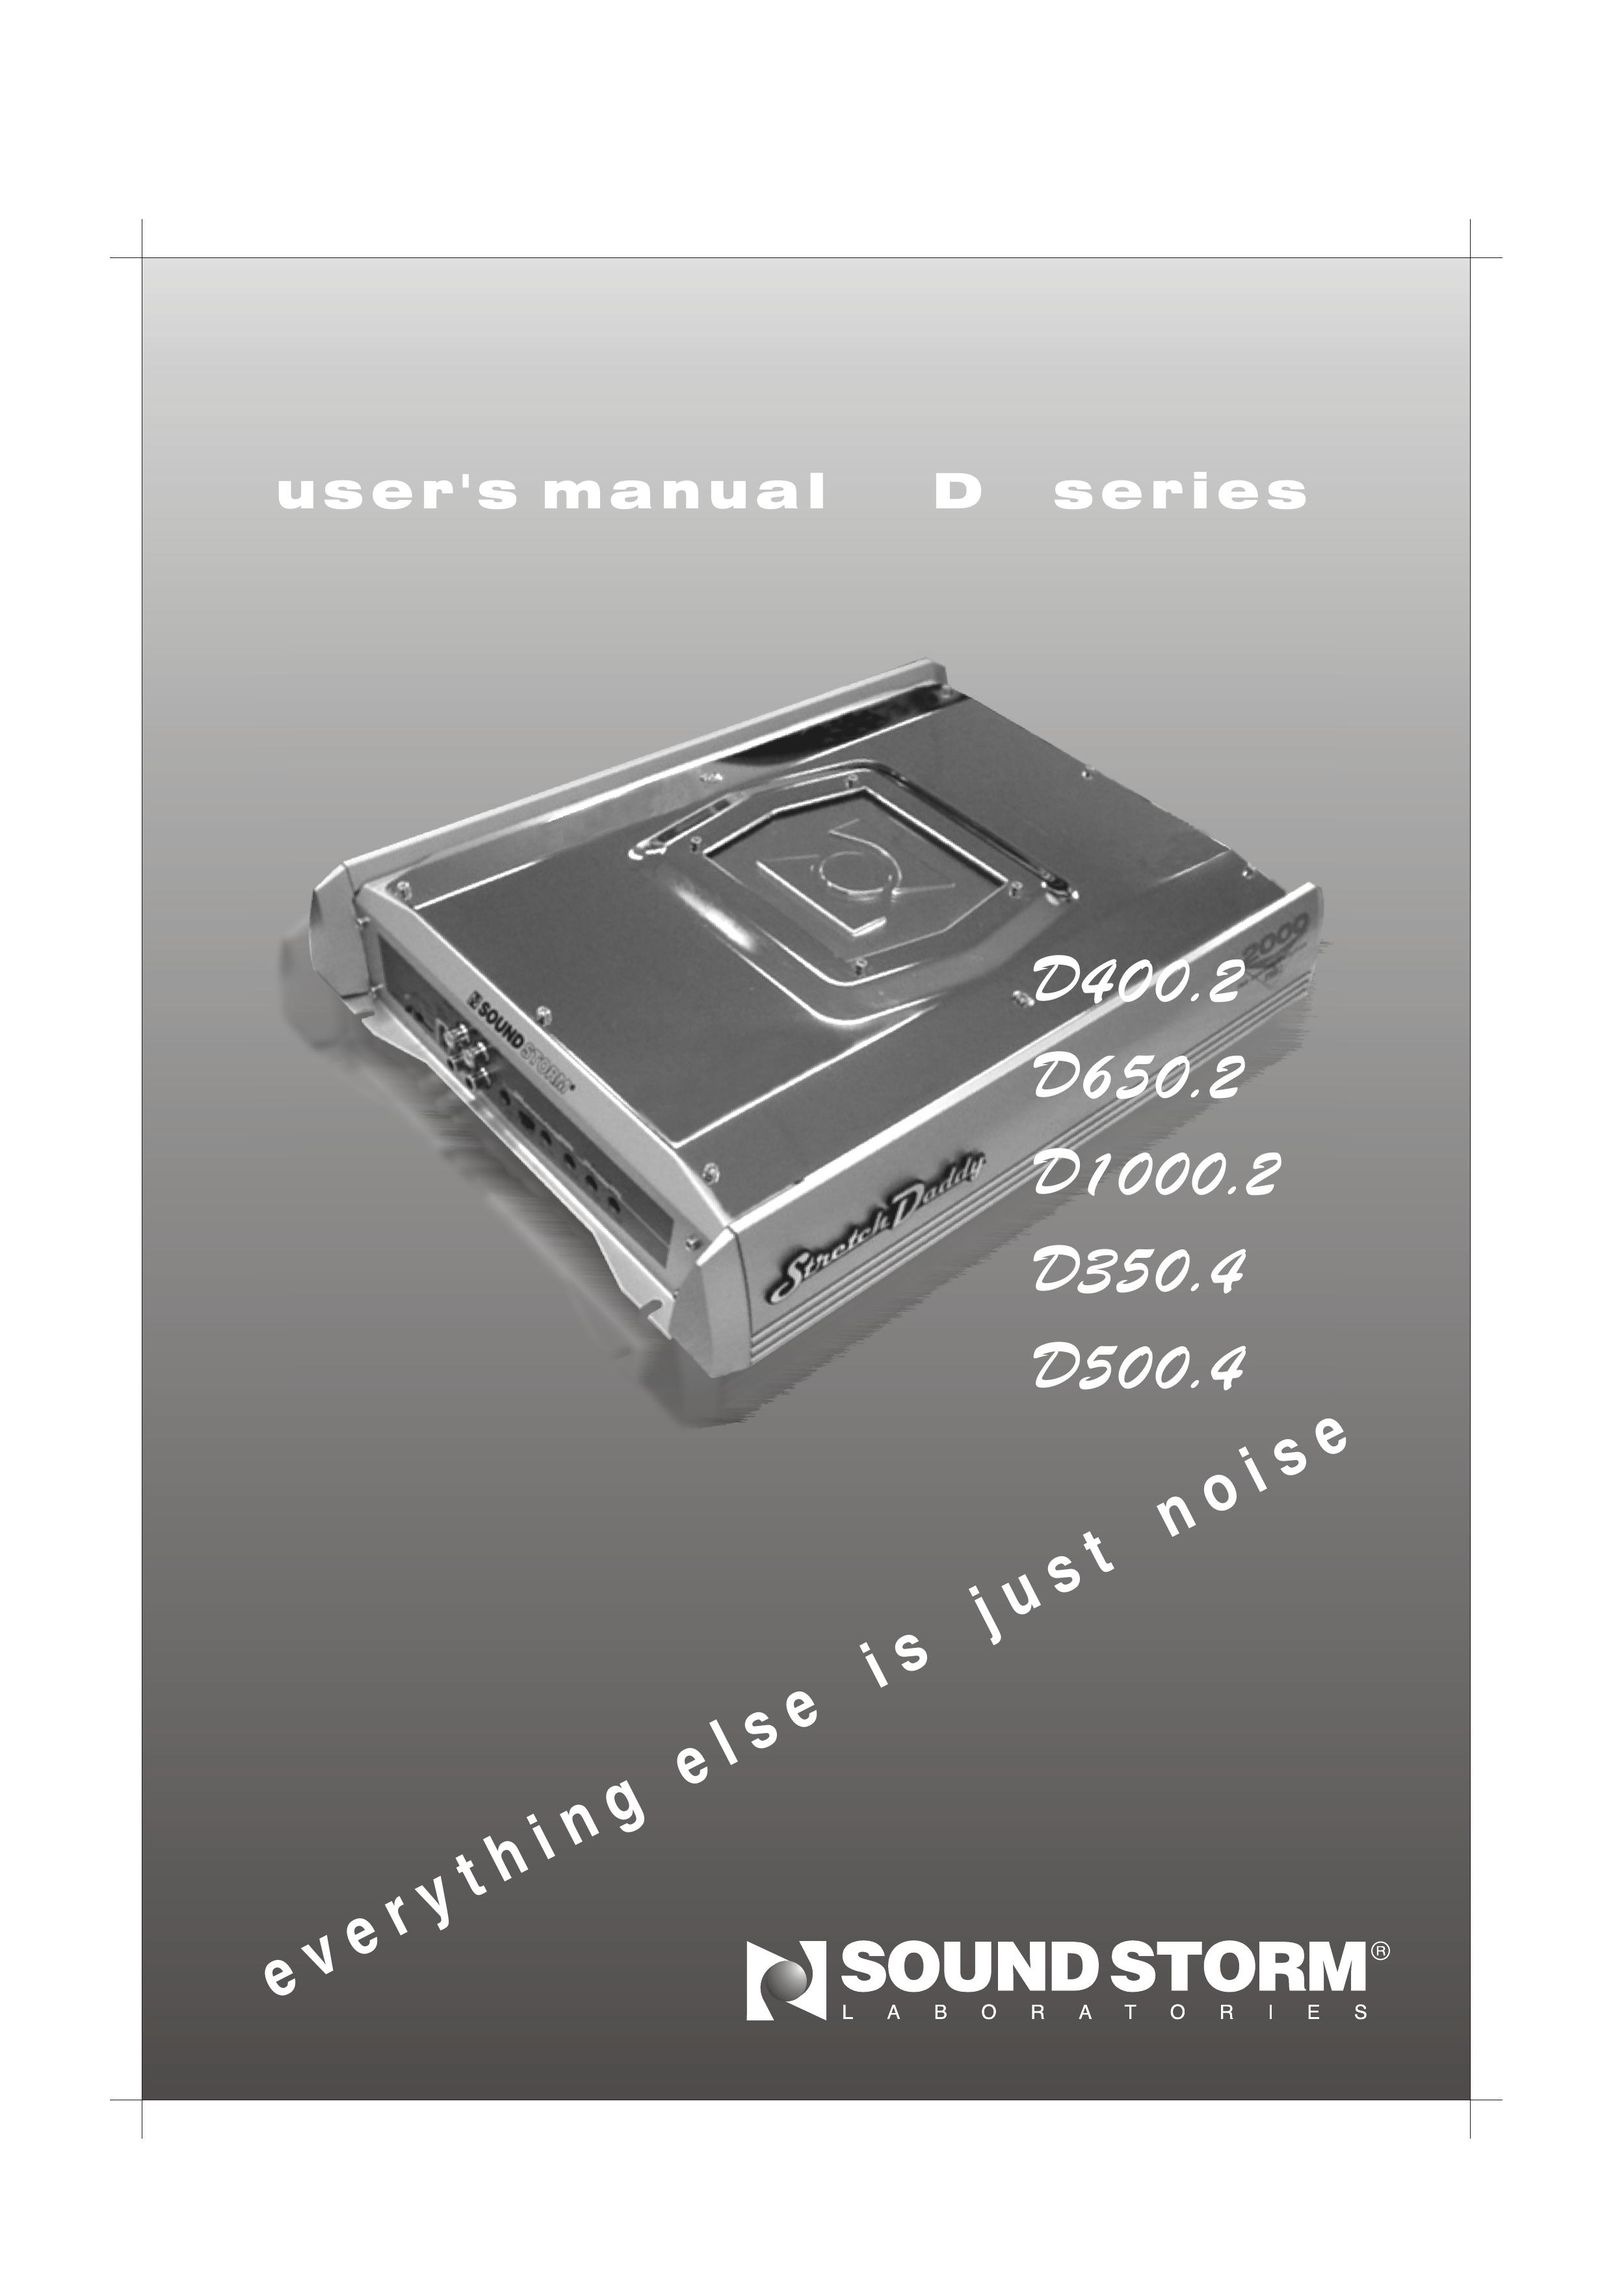 Sound Storm Laboratories D350.4 Stereo Amplifier User Manual